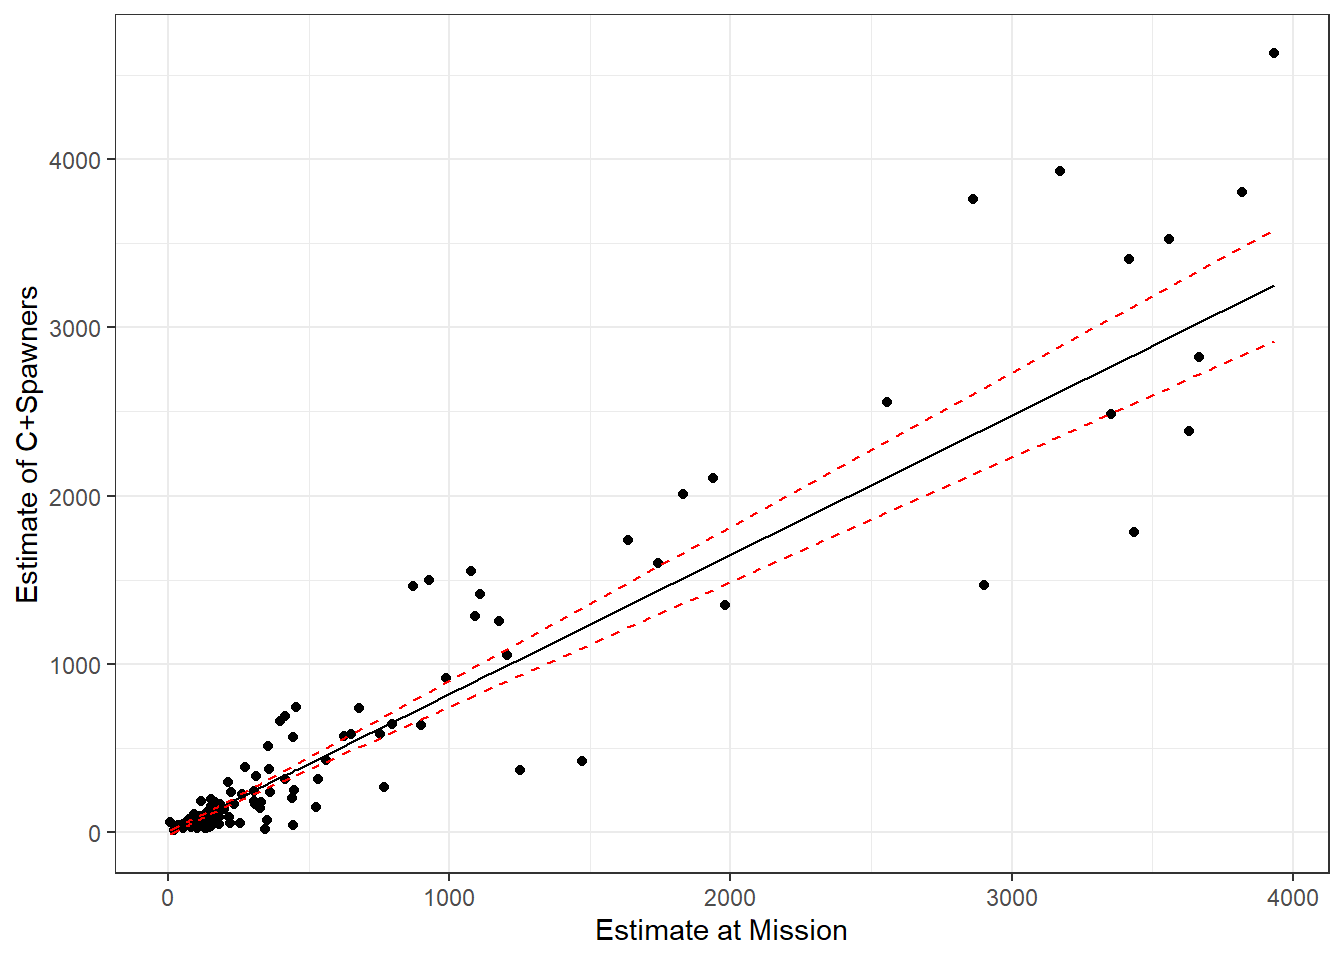 Predictions for the catch and spawning escapement based no the count of sockeye salmon at Mission. A 95% confidence interval for the mean is given by the red dotted lines.